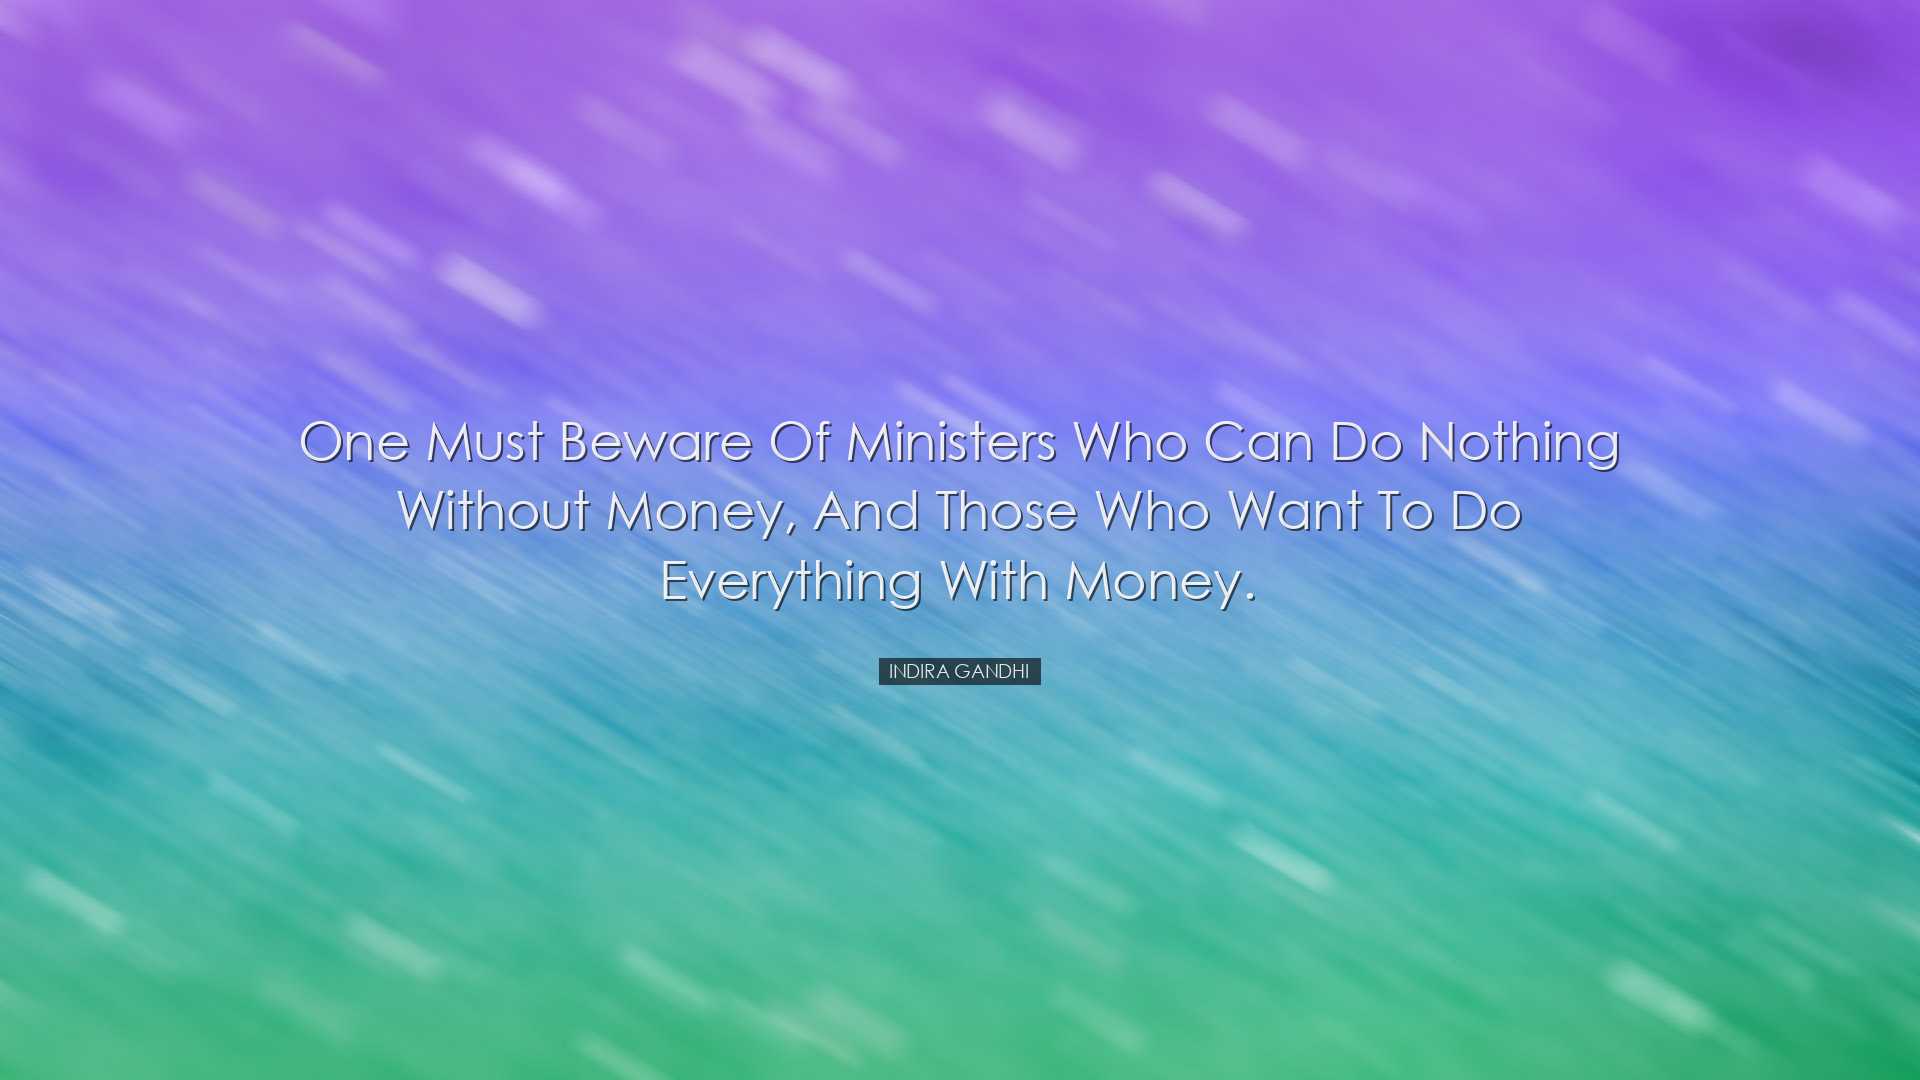 One must beware of ministers who can do nothing without money, and